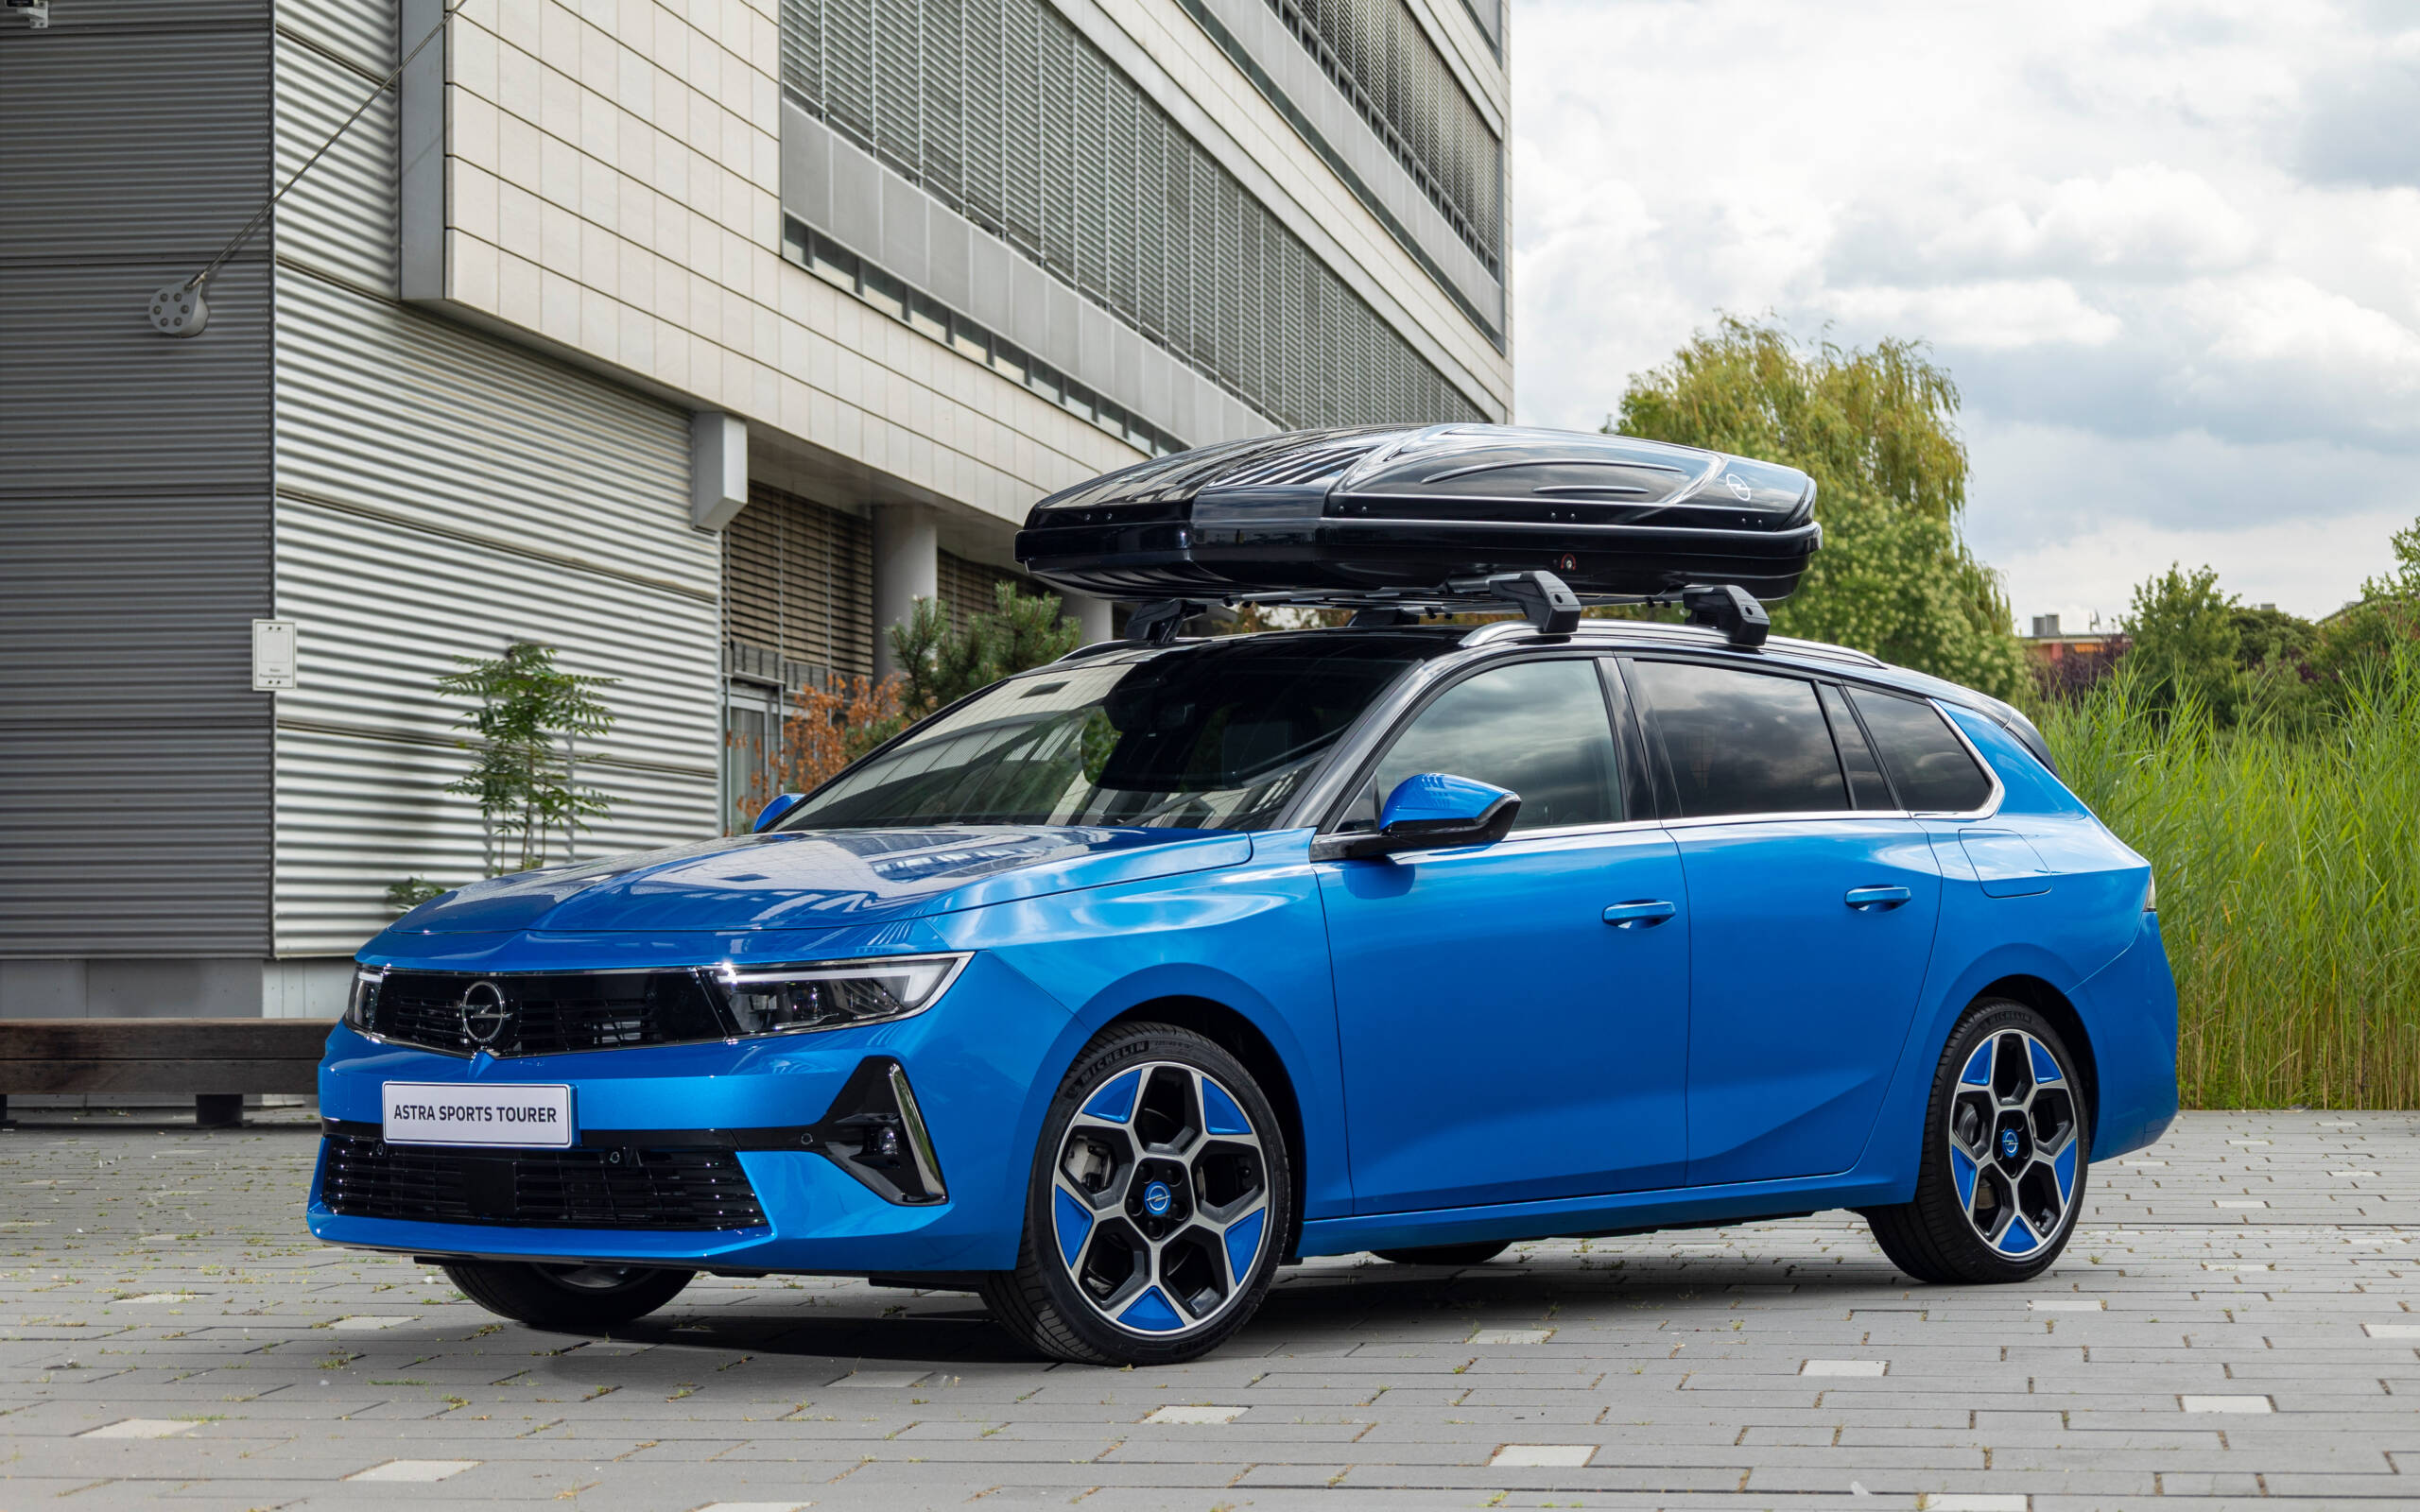 Made-to-Measure Accessories for Opel Astra and Astra Sports Tourer